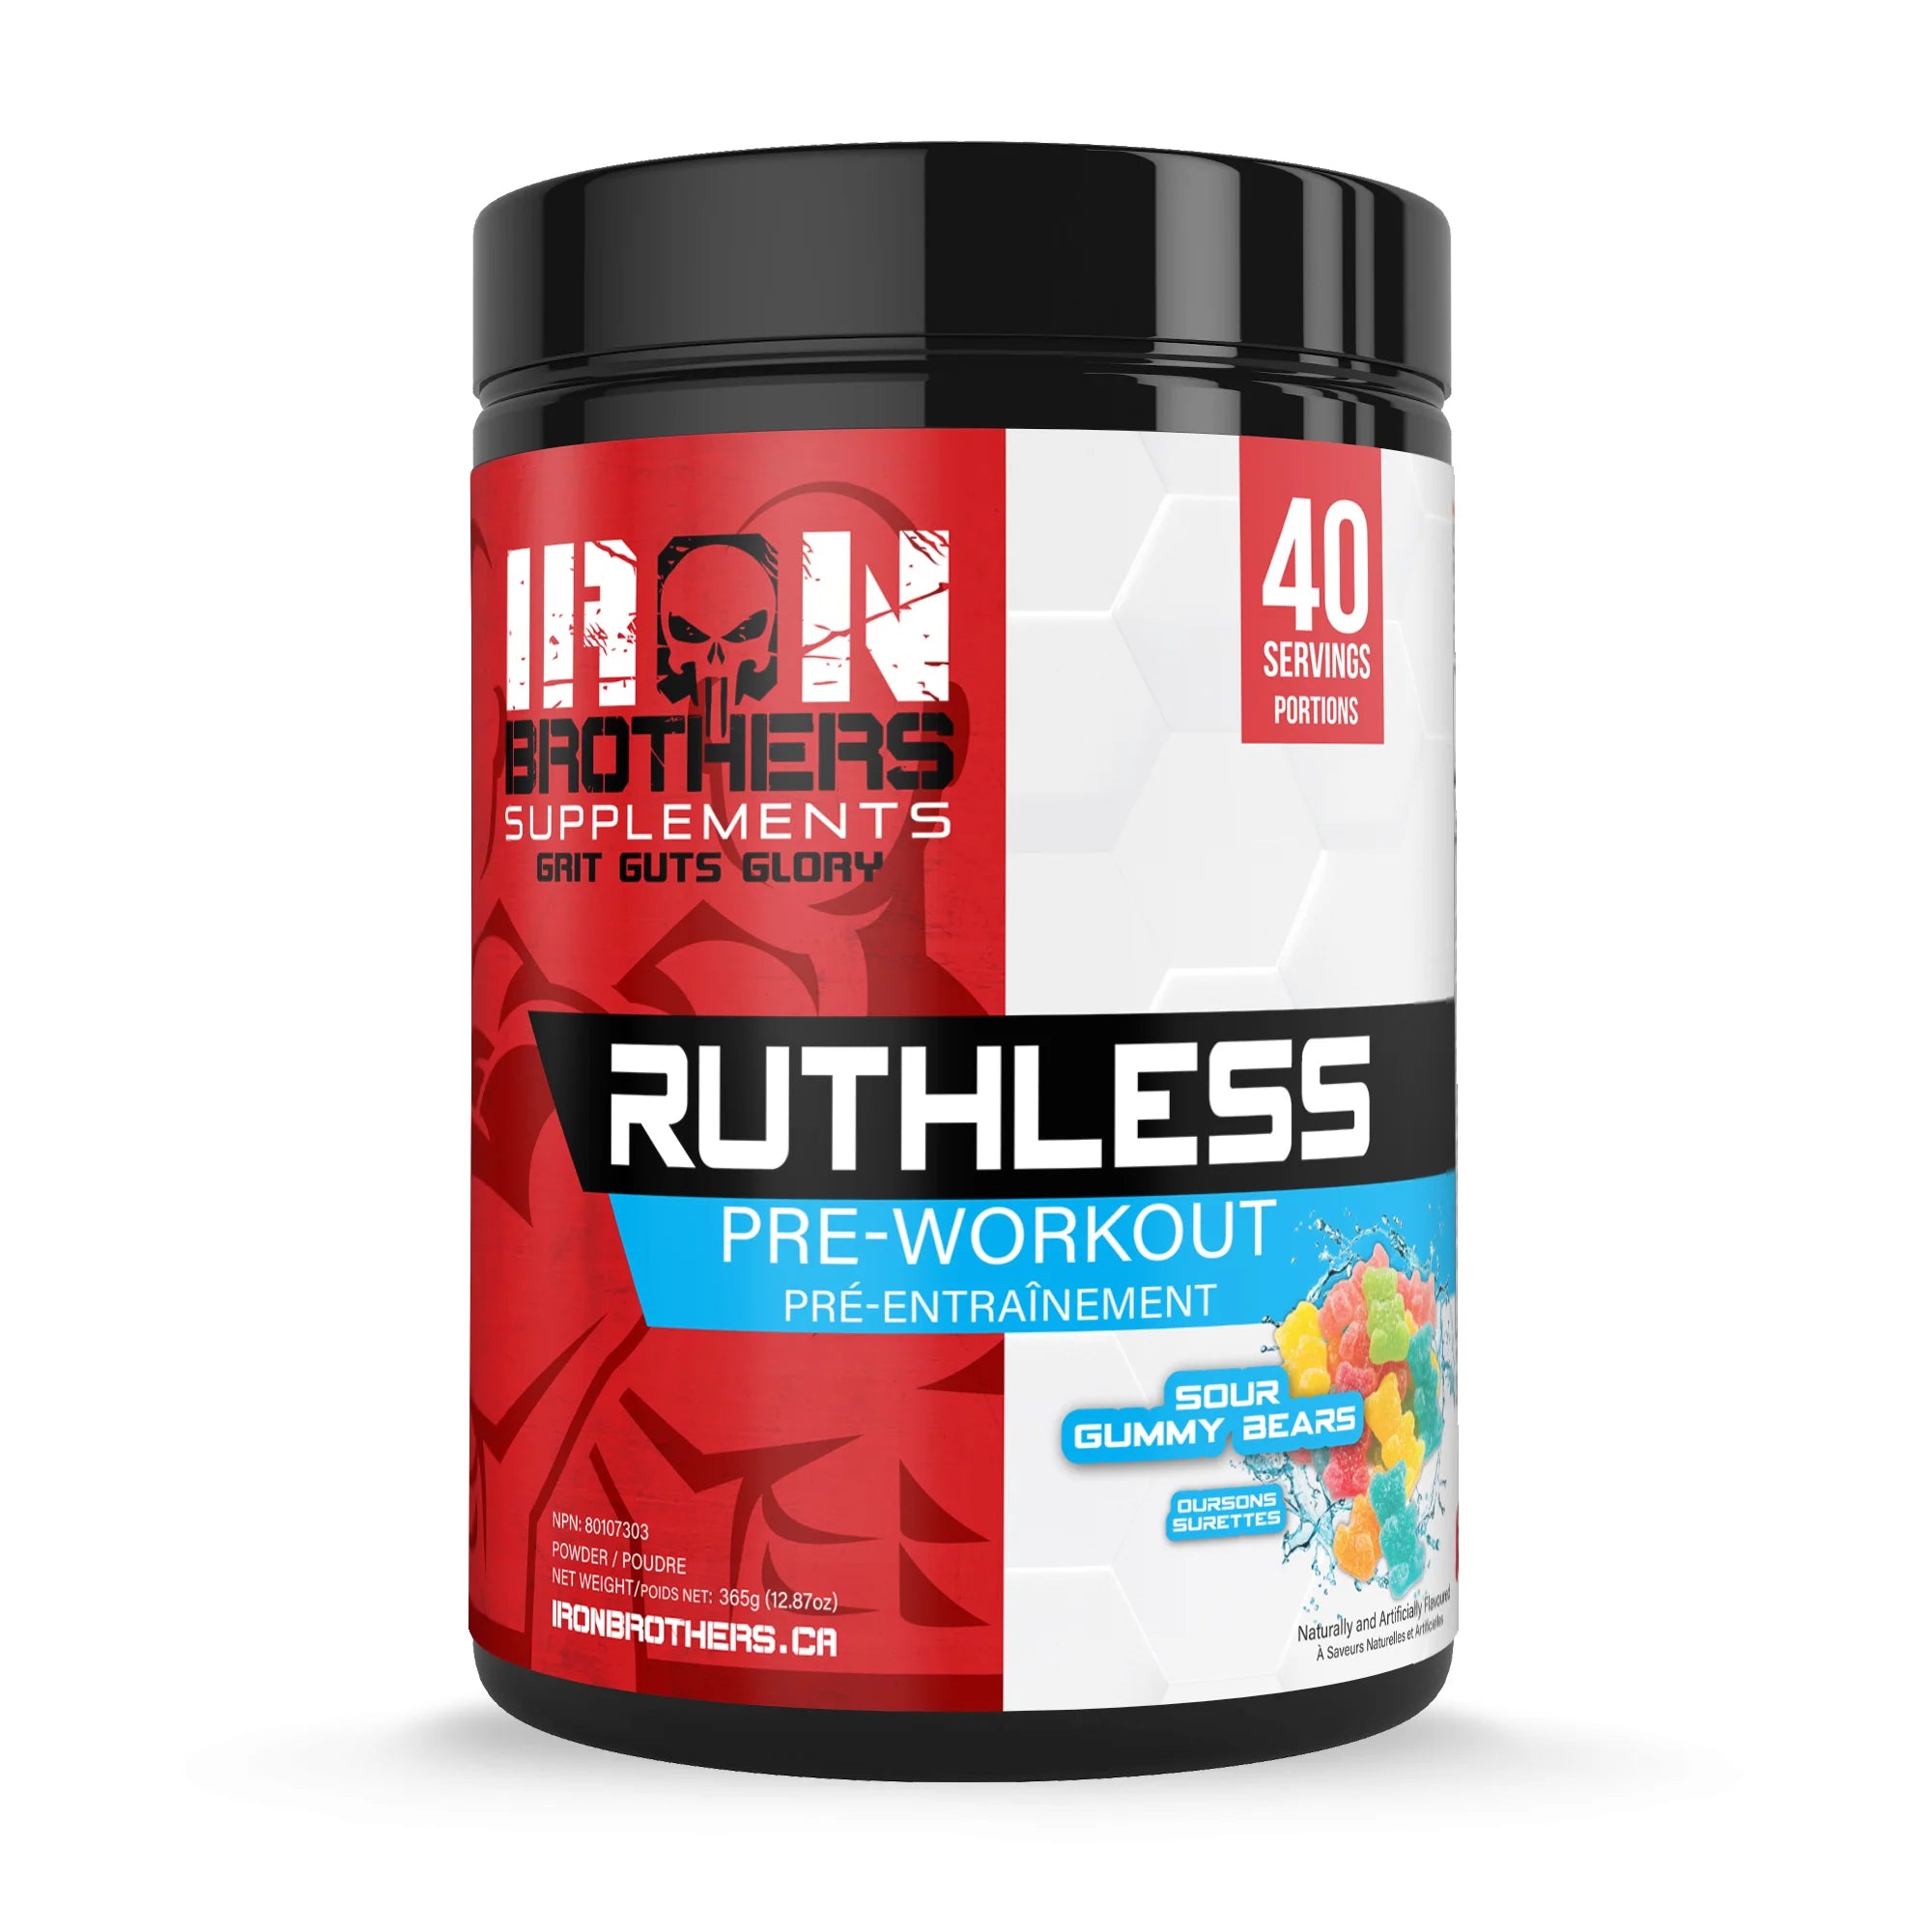 Iron Brothers Ruthless Pre-Workout (Sour Gummy Bears)